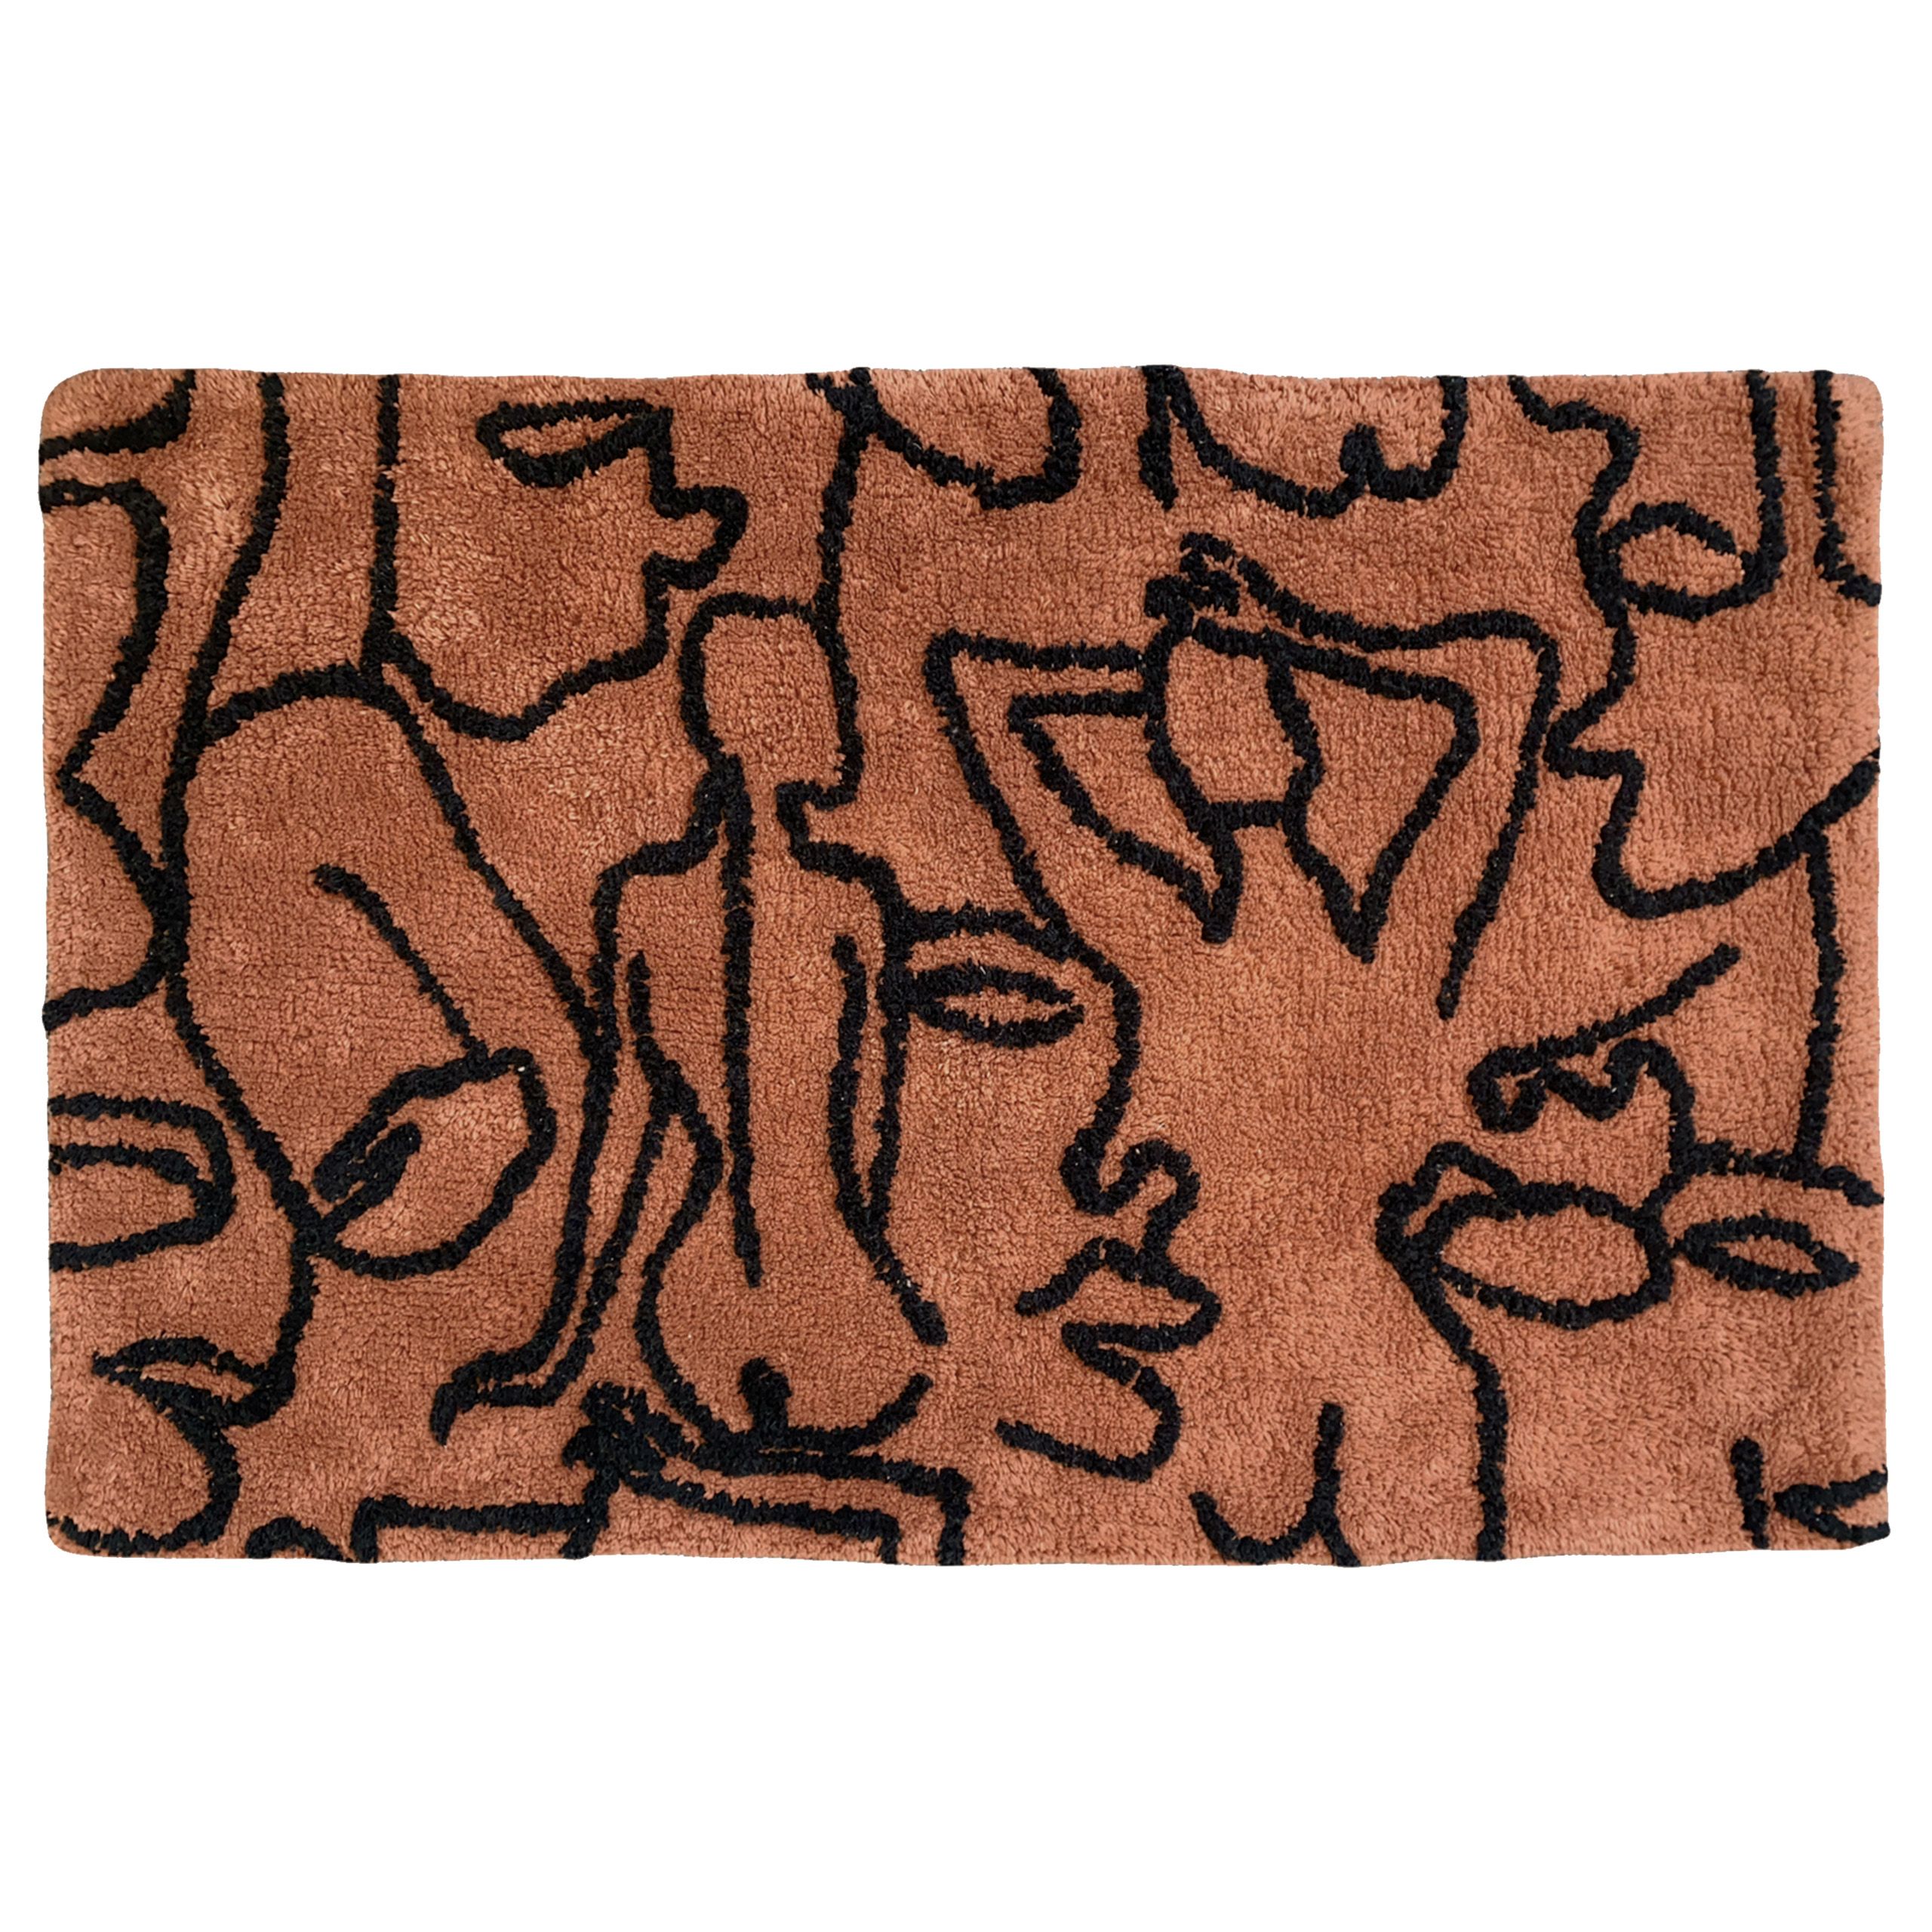 Featuring an abstract design of the female form on a fluffy cotton fabric. Made from 100% Cotton, making this bath mat incredibly soft under foot. This bath mat has an anti-slip quality, keeping it securely in place on your bathroom floor. The 1800 GSM ensures this bath mat is super absorbent preventing post-bath or shower puddles.